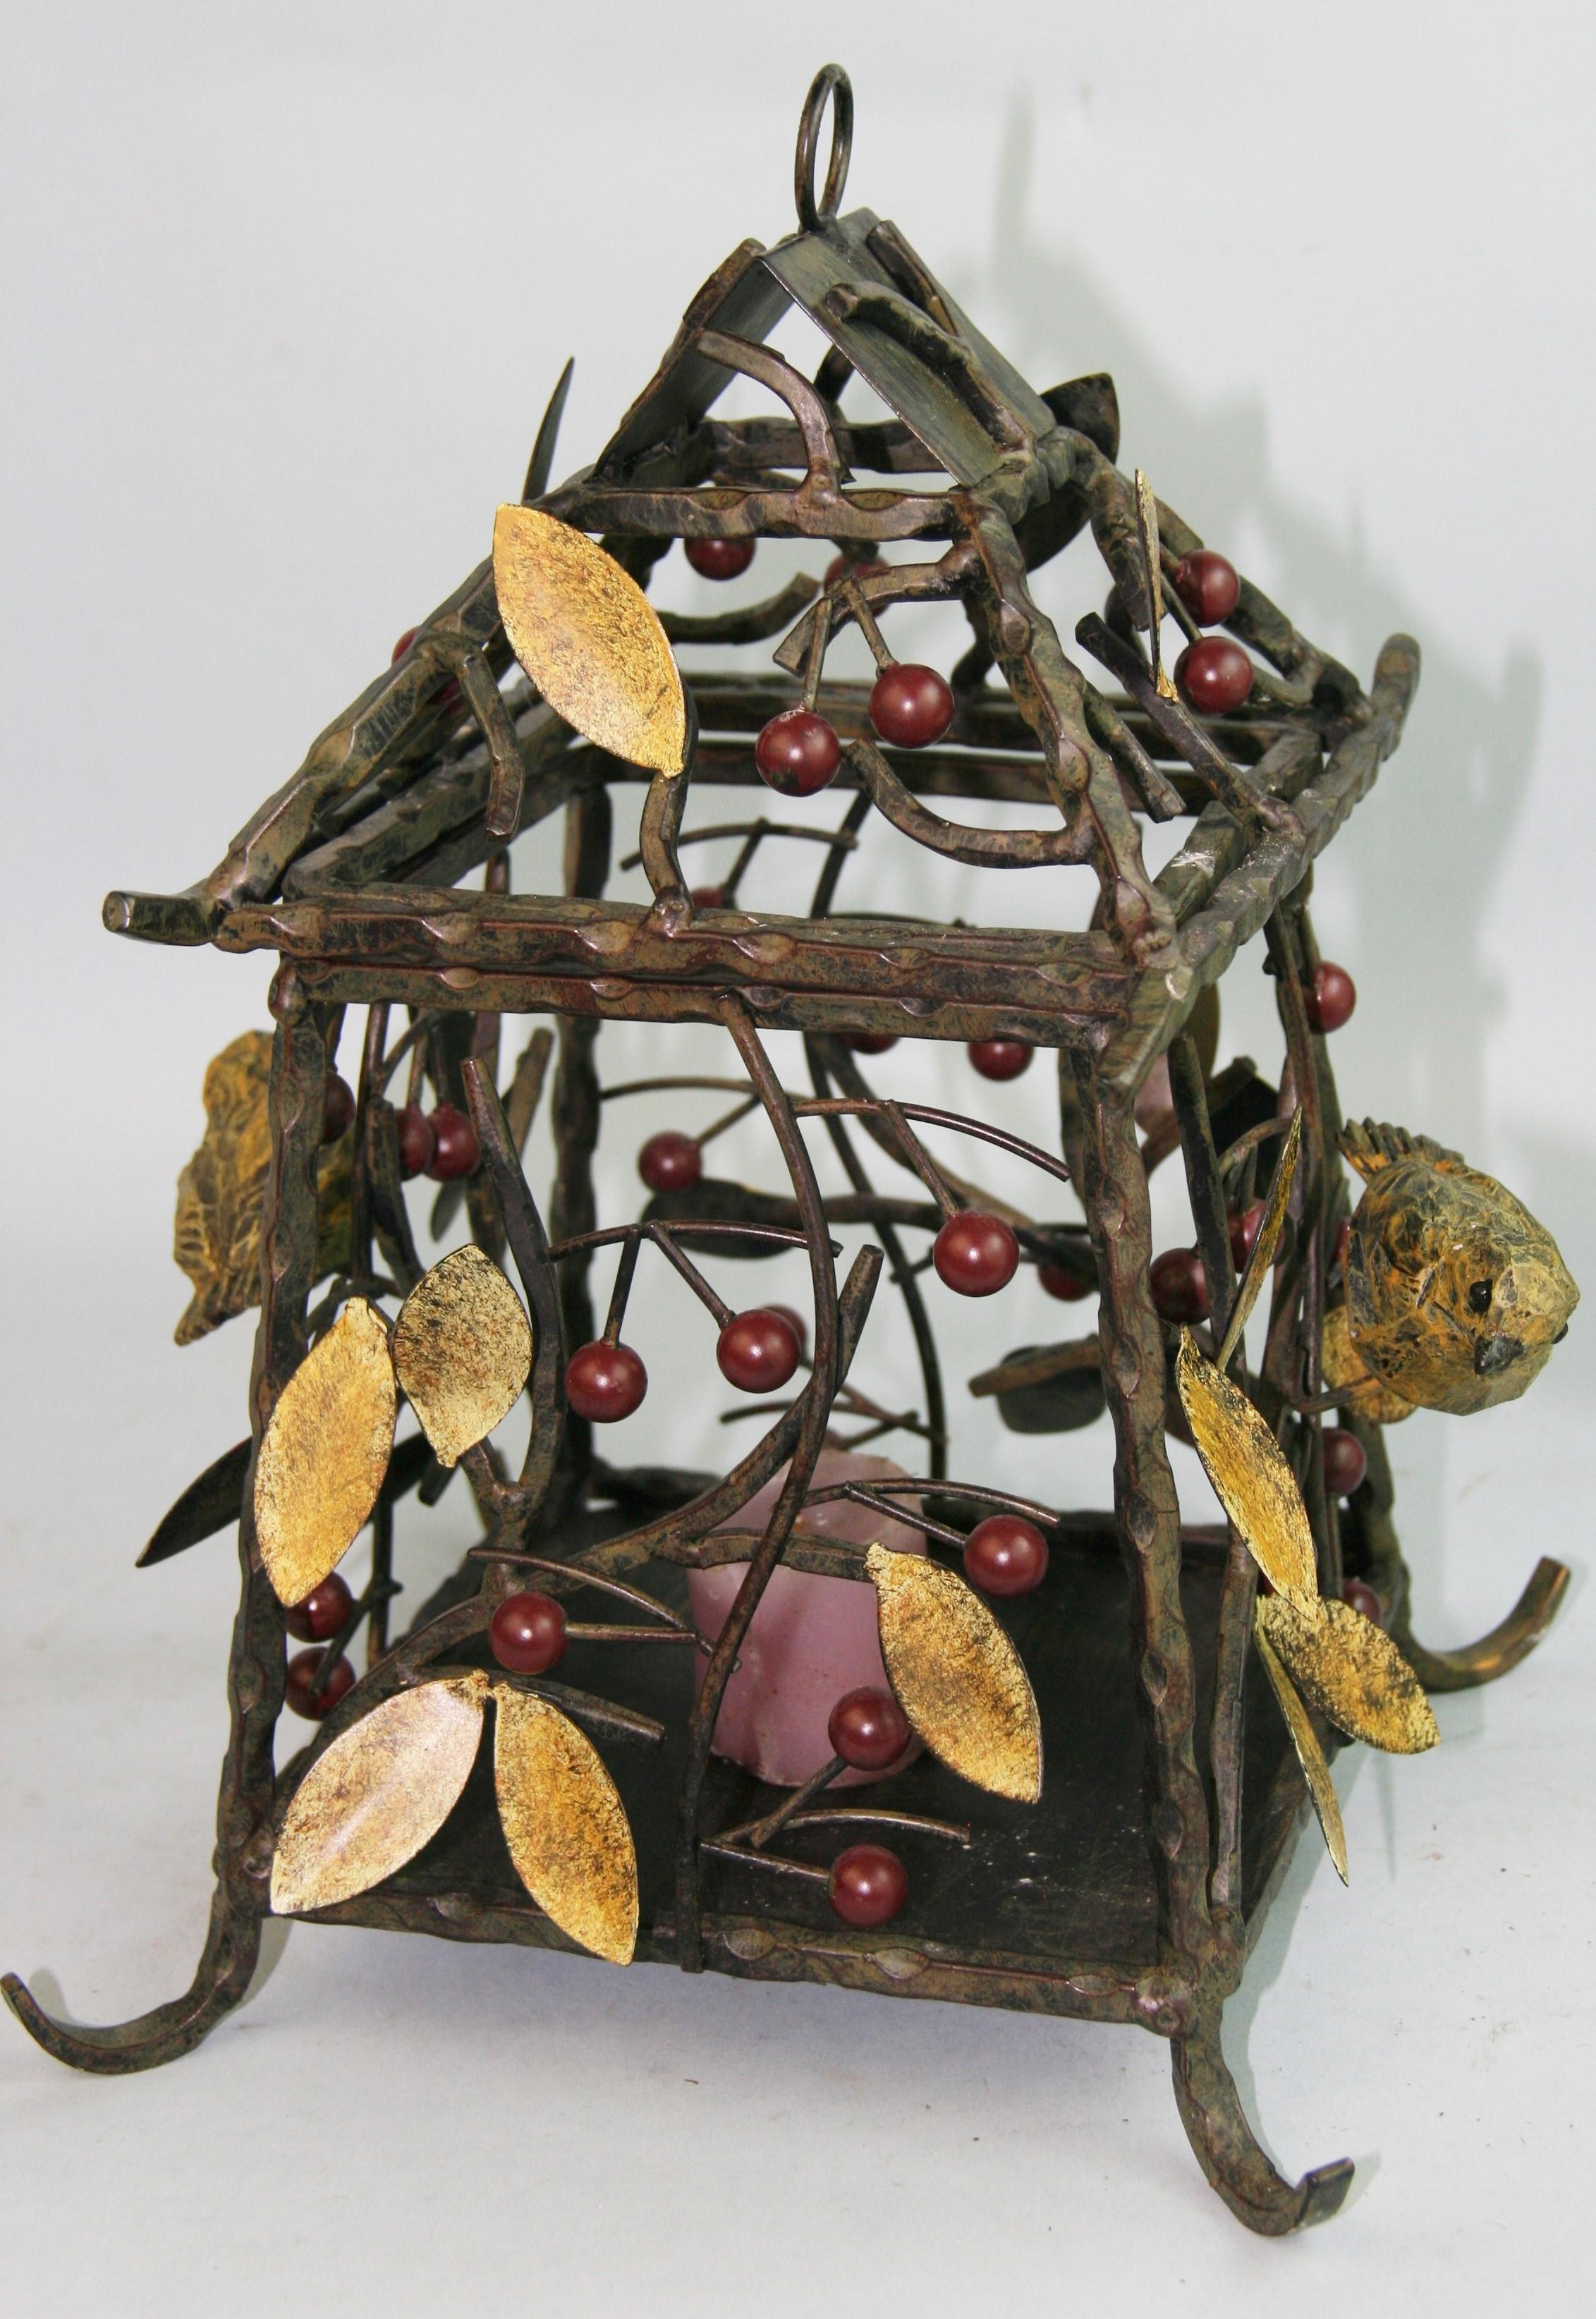 1219 Hand crafted Arts and Craft iron garden lantern supplied with 2 feet of chain.
Top is hinged to place candle/bulb ( can be wired for 60 watt bulb)
Twisted metal construction with hand painted leaves and berries with 2 cast birds